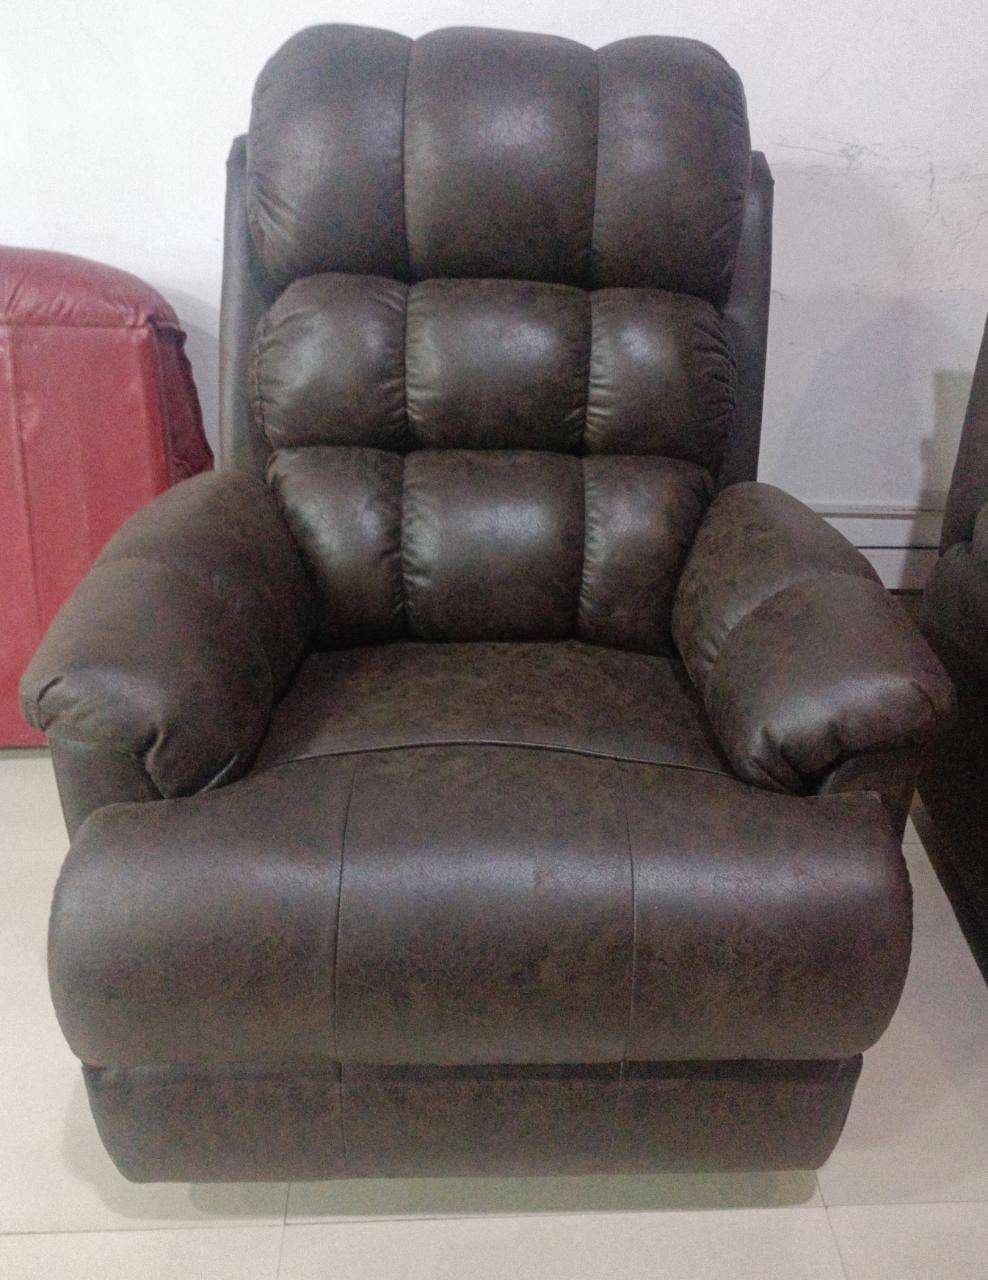 Chair, Sofa, Furniture for sale; Brand New अवस्था